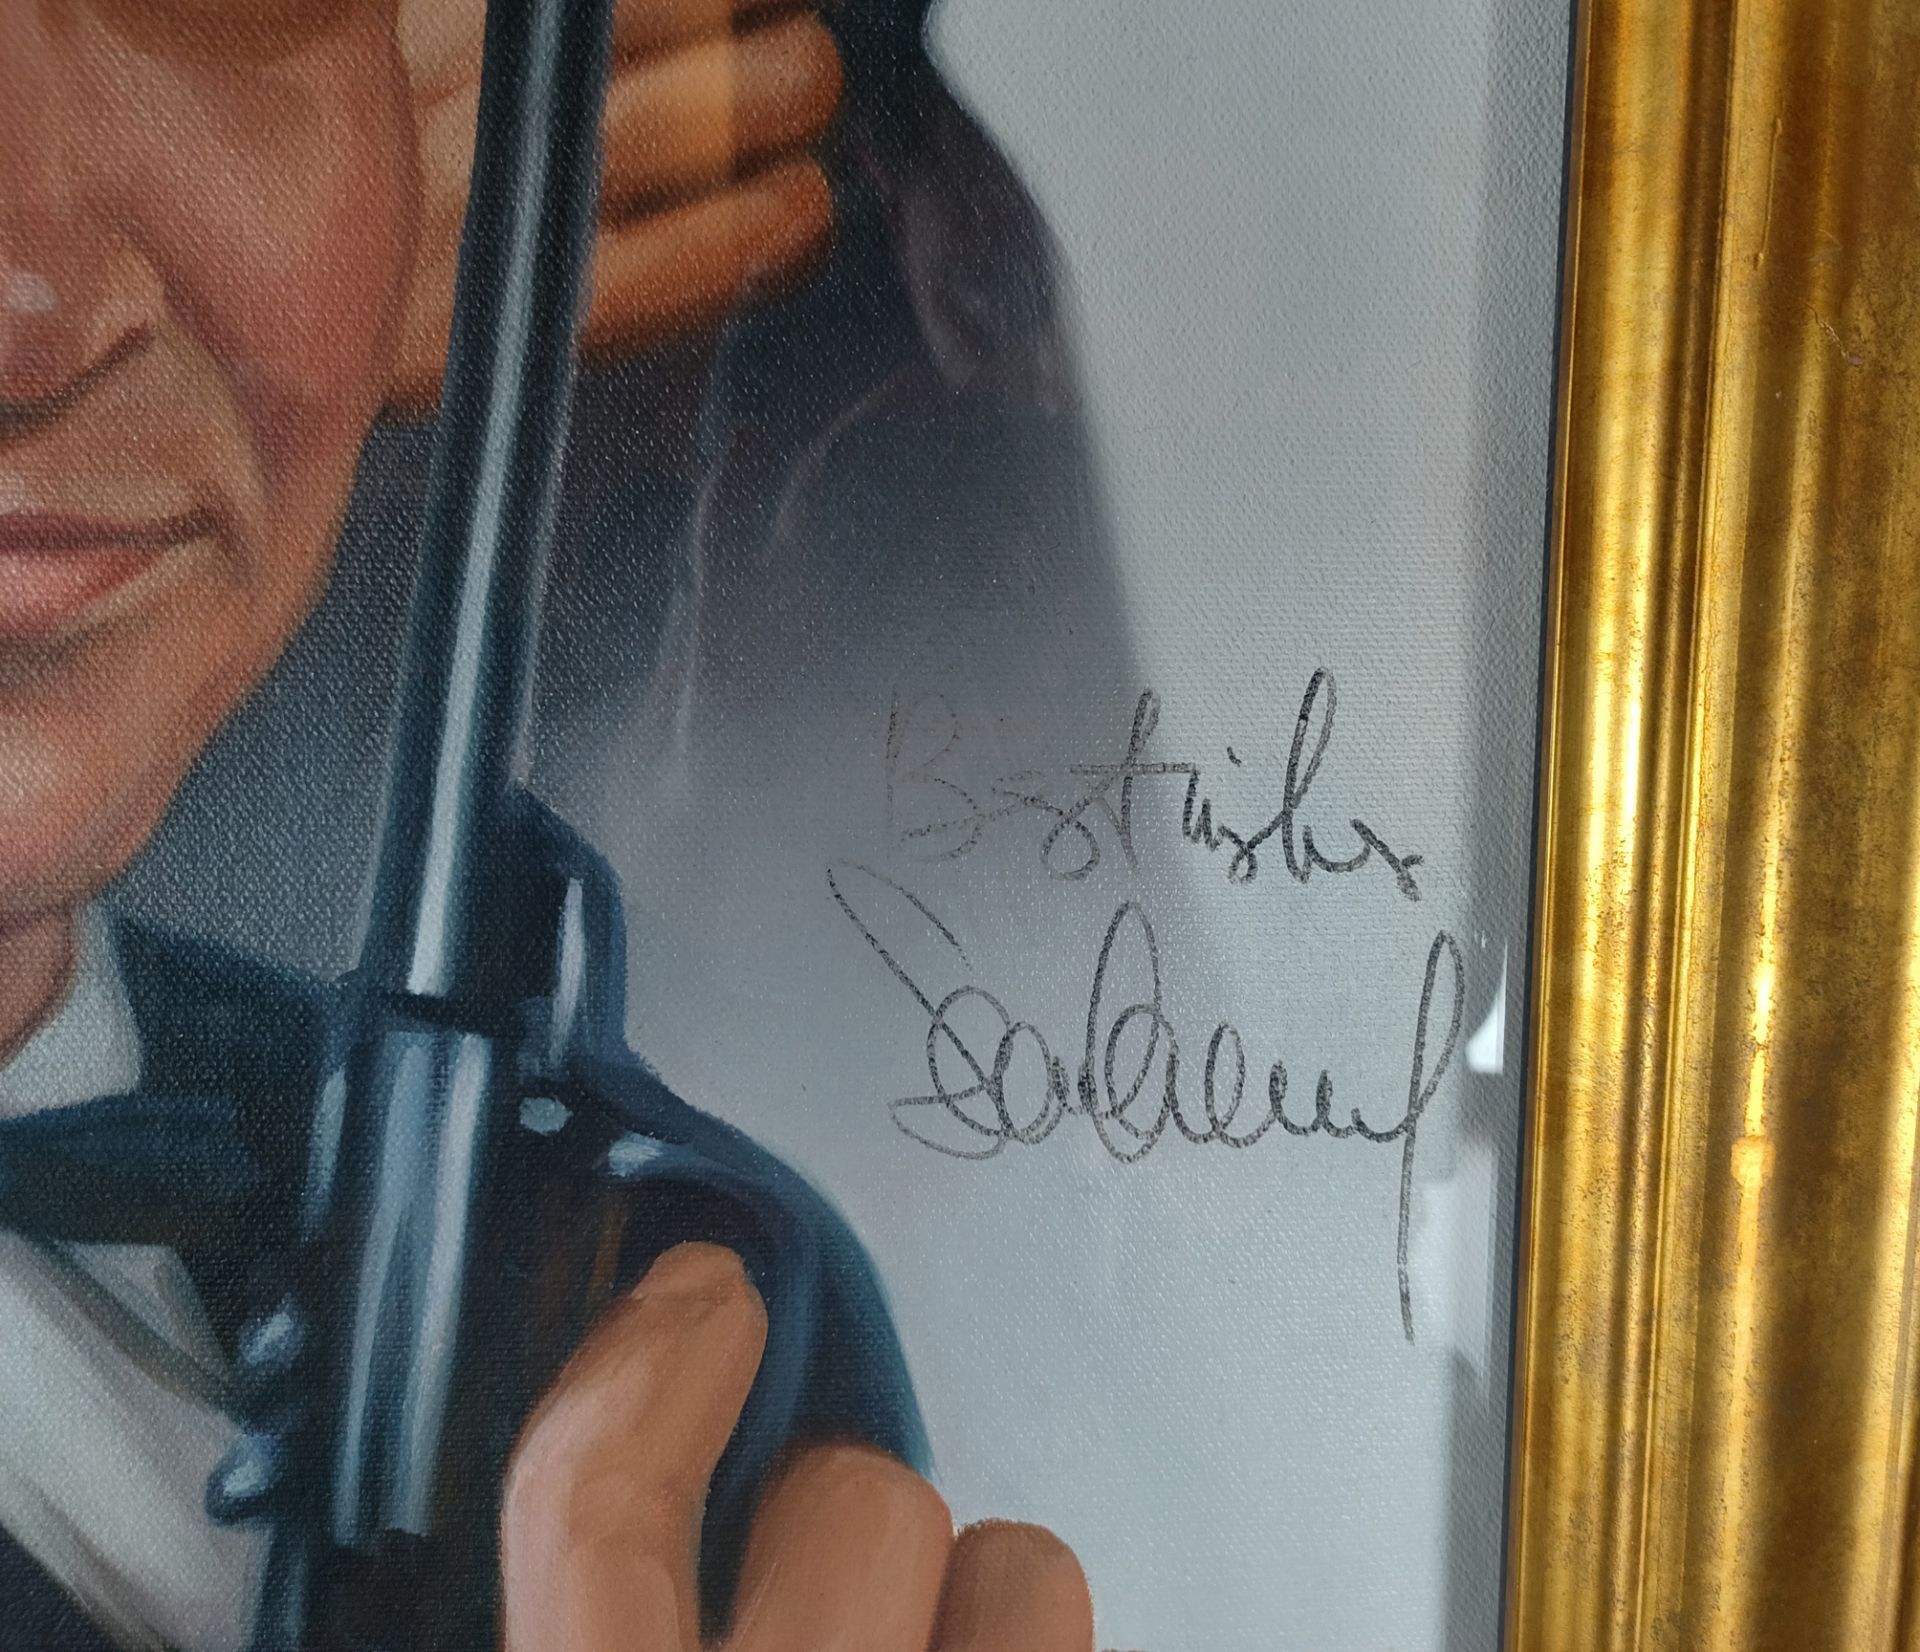 Oil Painting of 4 James Bond Actors with Signatures - Image 5 of 8